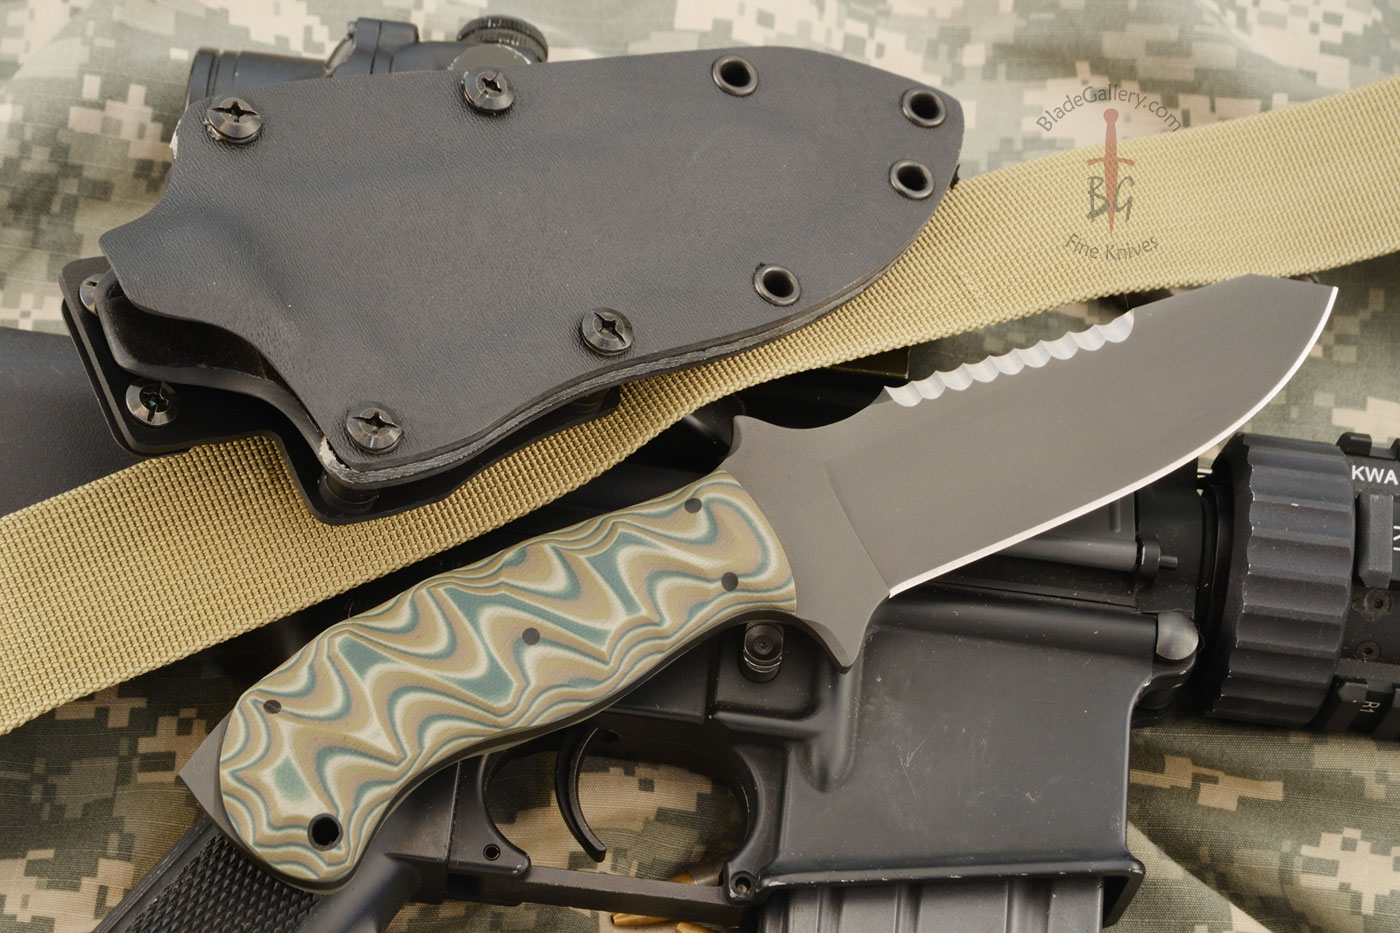 Utility Crusher with Sculpted Camo G10